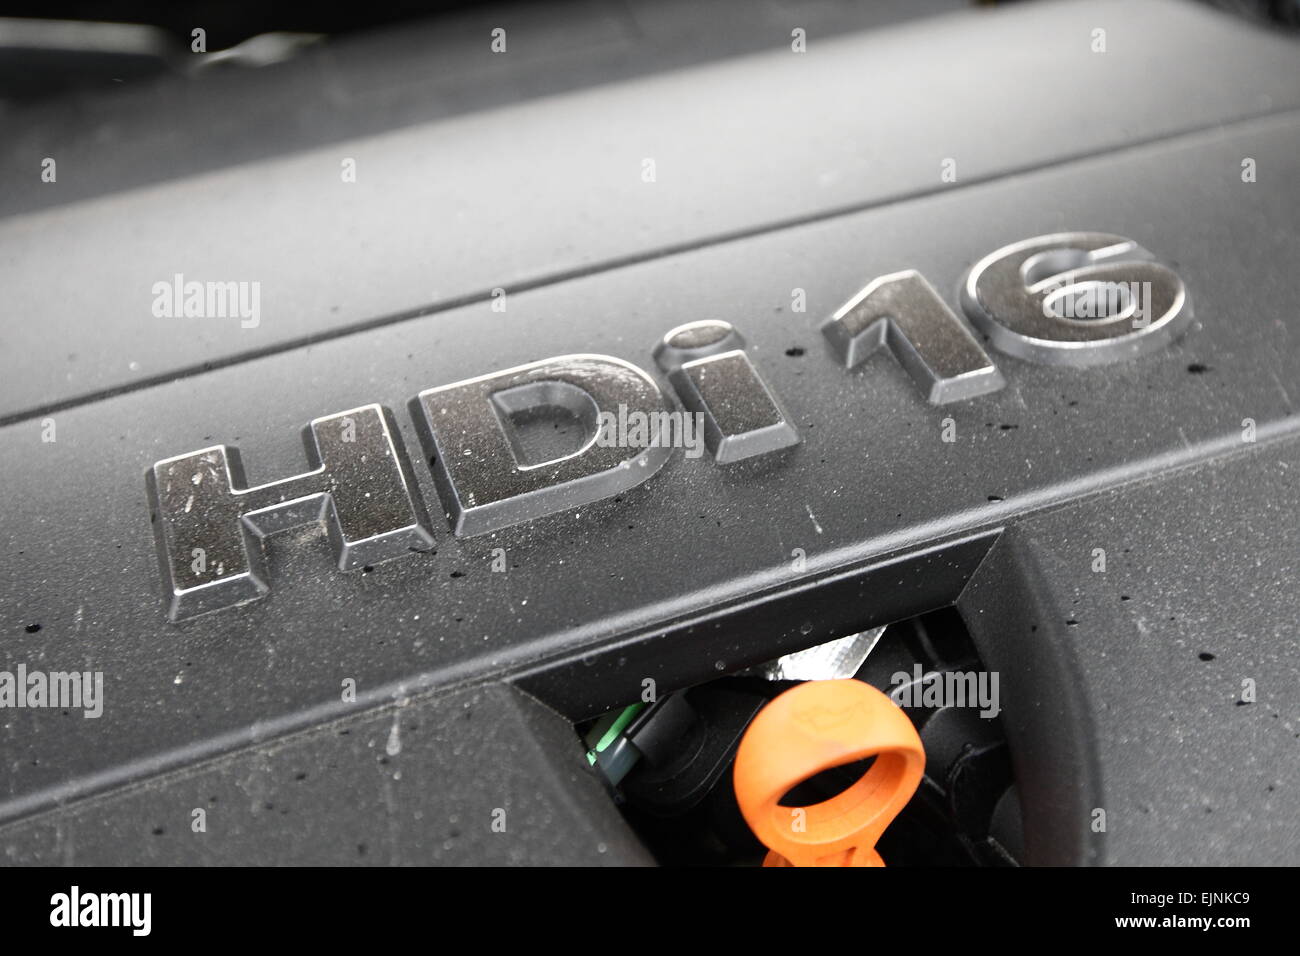 Gdynia, Poland. 30th March, 2015. Acc. recent studies exhaust from diesel engines contribute to an increase of 20 to 50% of lung cancer. Pictured: HDI type diesel engine mounted in Peugeot 508 car Credit:  Michal Fludra/Alamy Live News Stock Photo